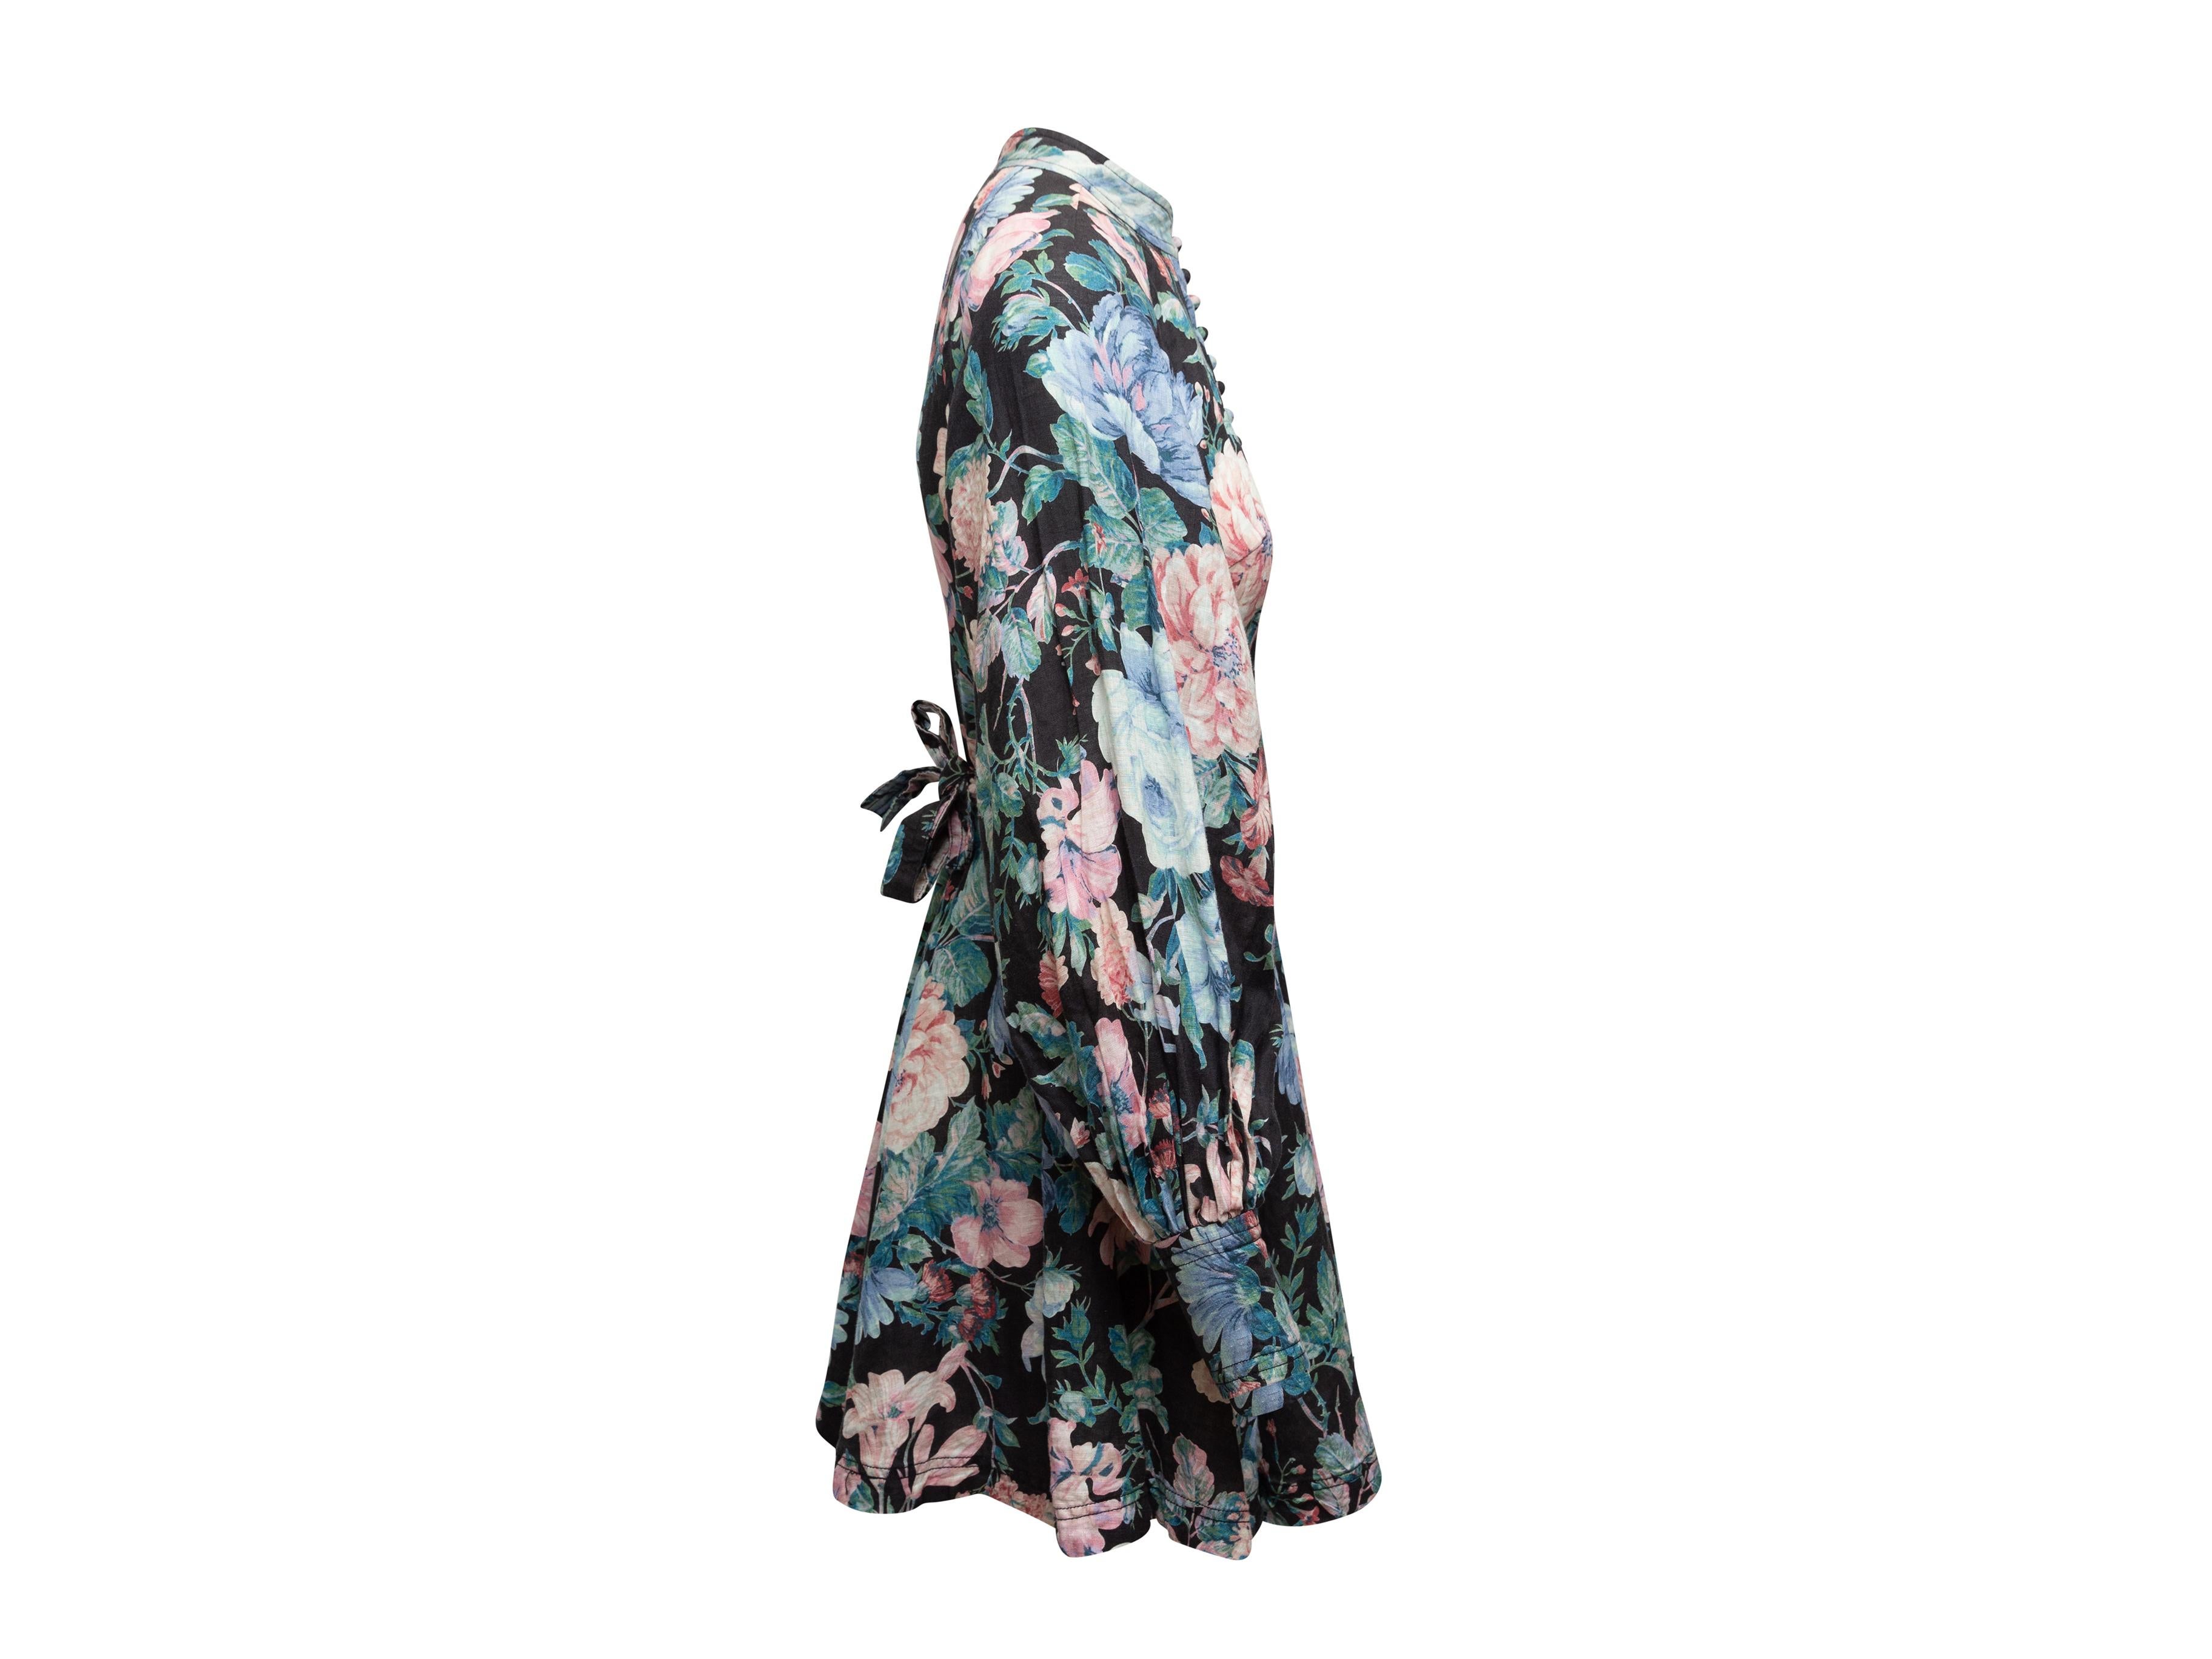 Product details: Black and multicolor linen floral print dress by Zimmermann. Long sleeves. Crew neck. Sash tie at waist. Button closures at center front. Designer size 1. 32